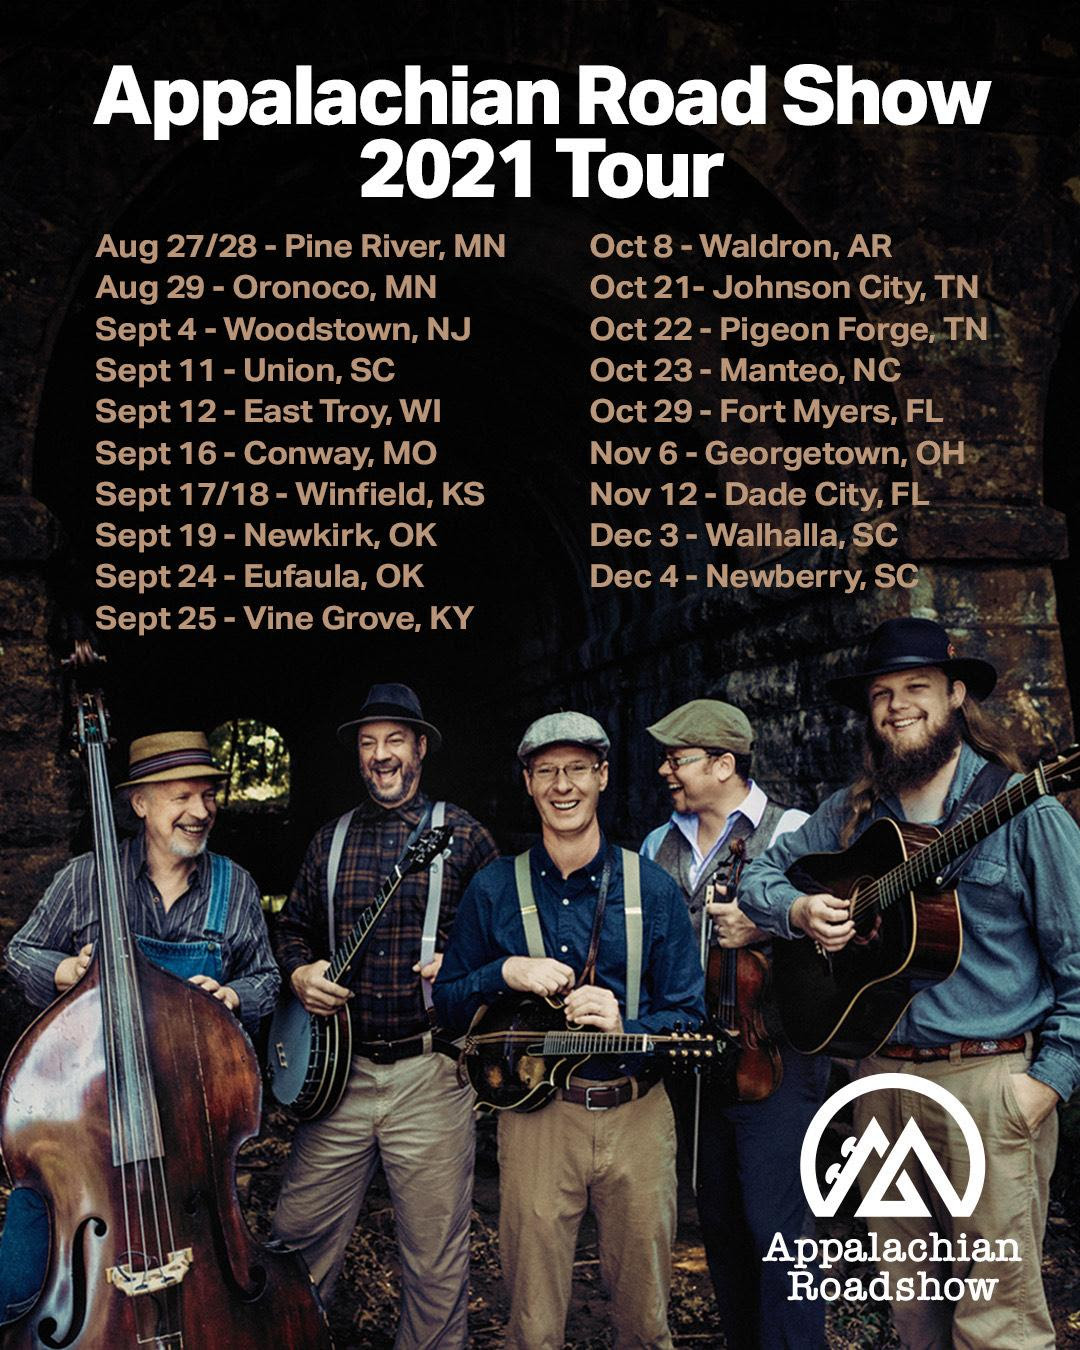 Appalachian Road Show Announces 2021 Fall Tour With 10+ Festival Stops